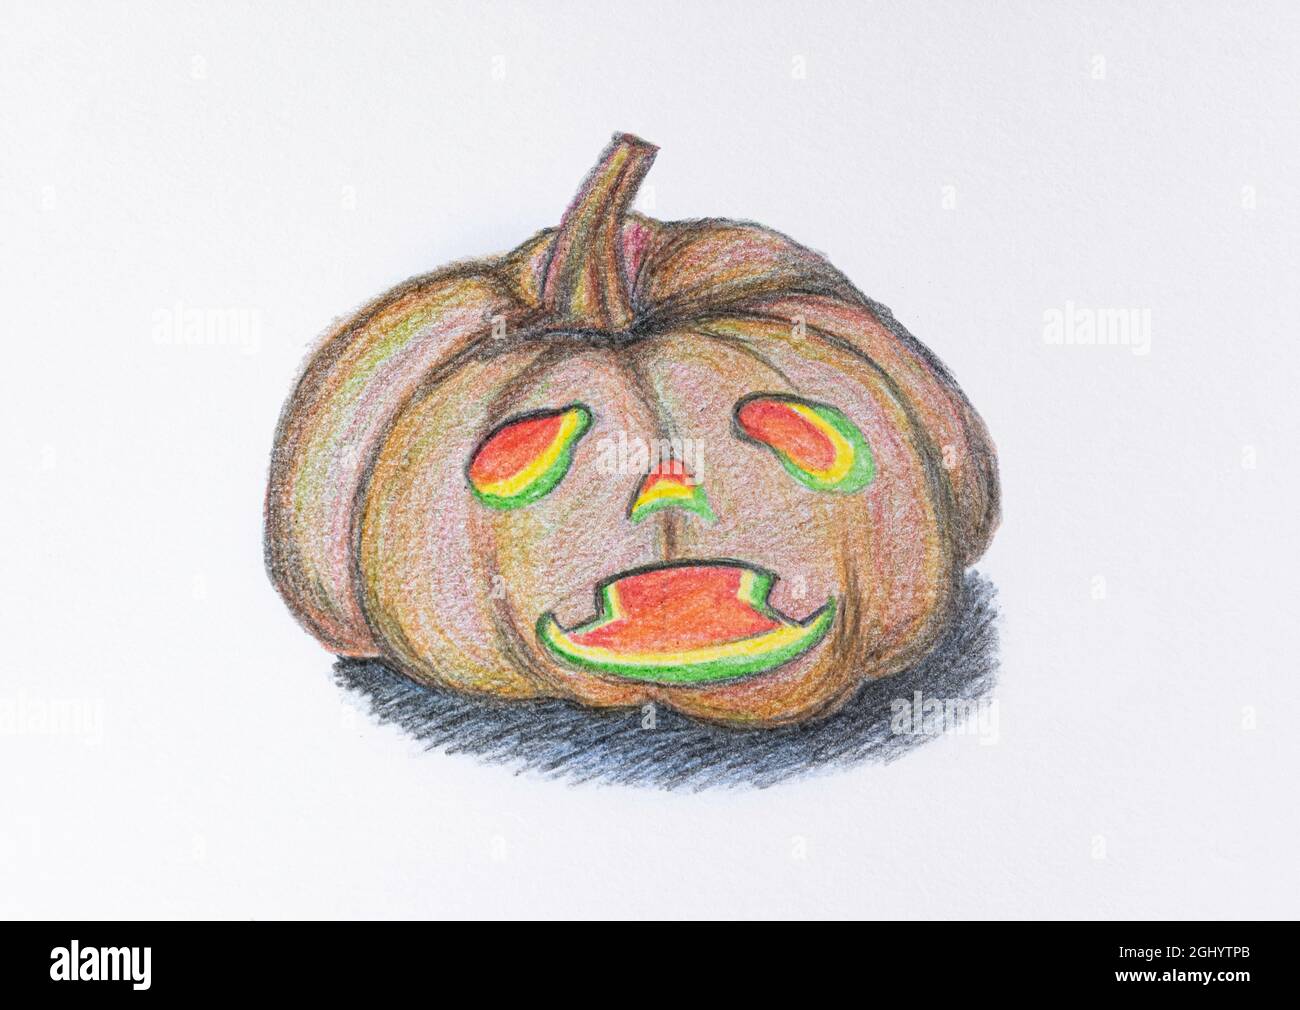 How to Draw a Realistic Pumpkin Step by Step Tutorial  EasyDrawingTips